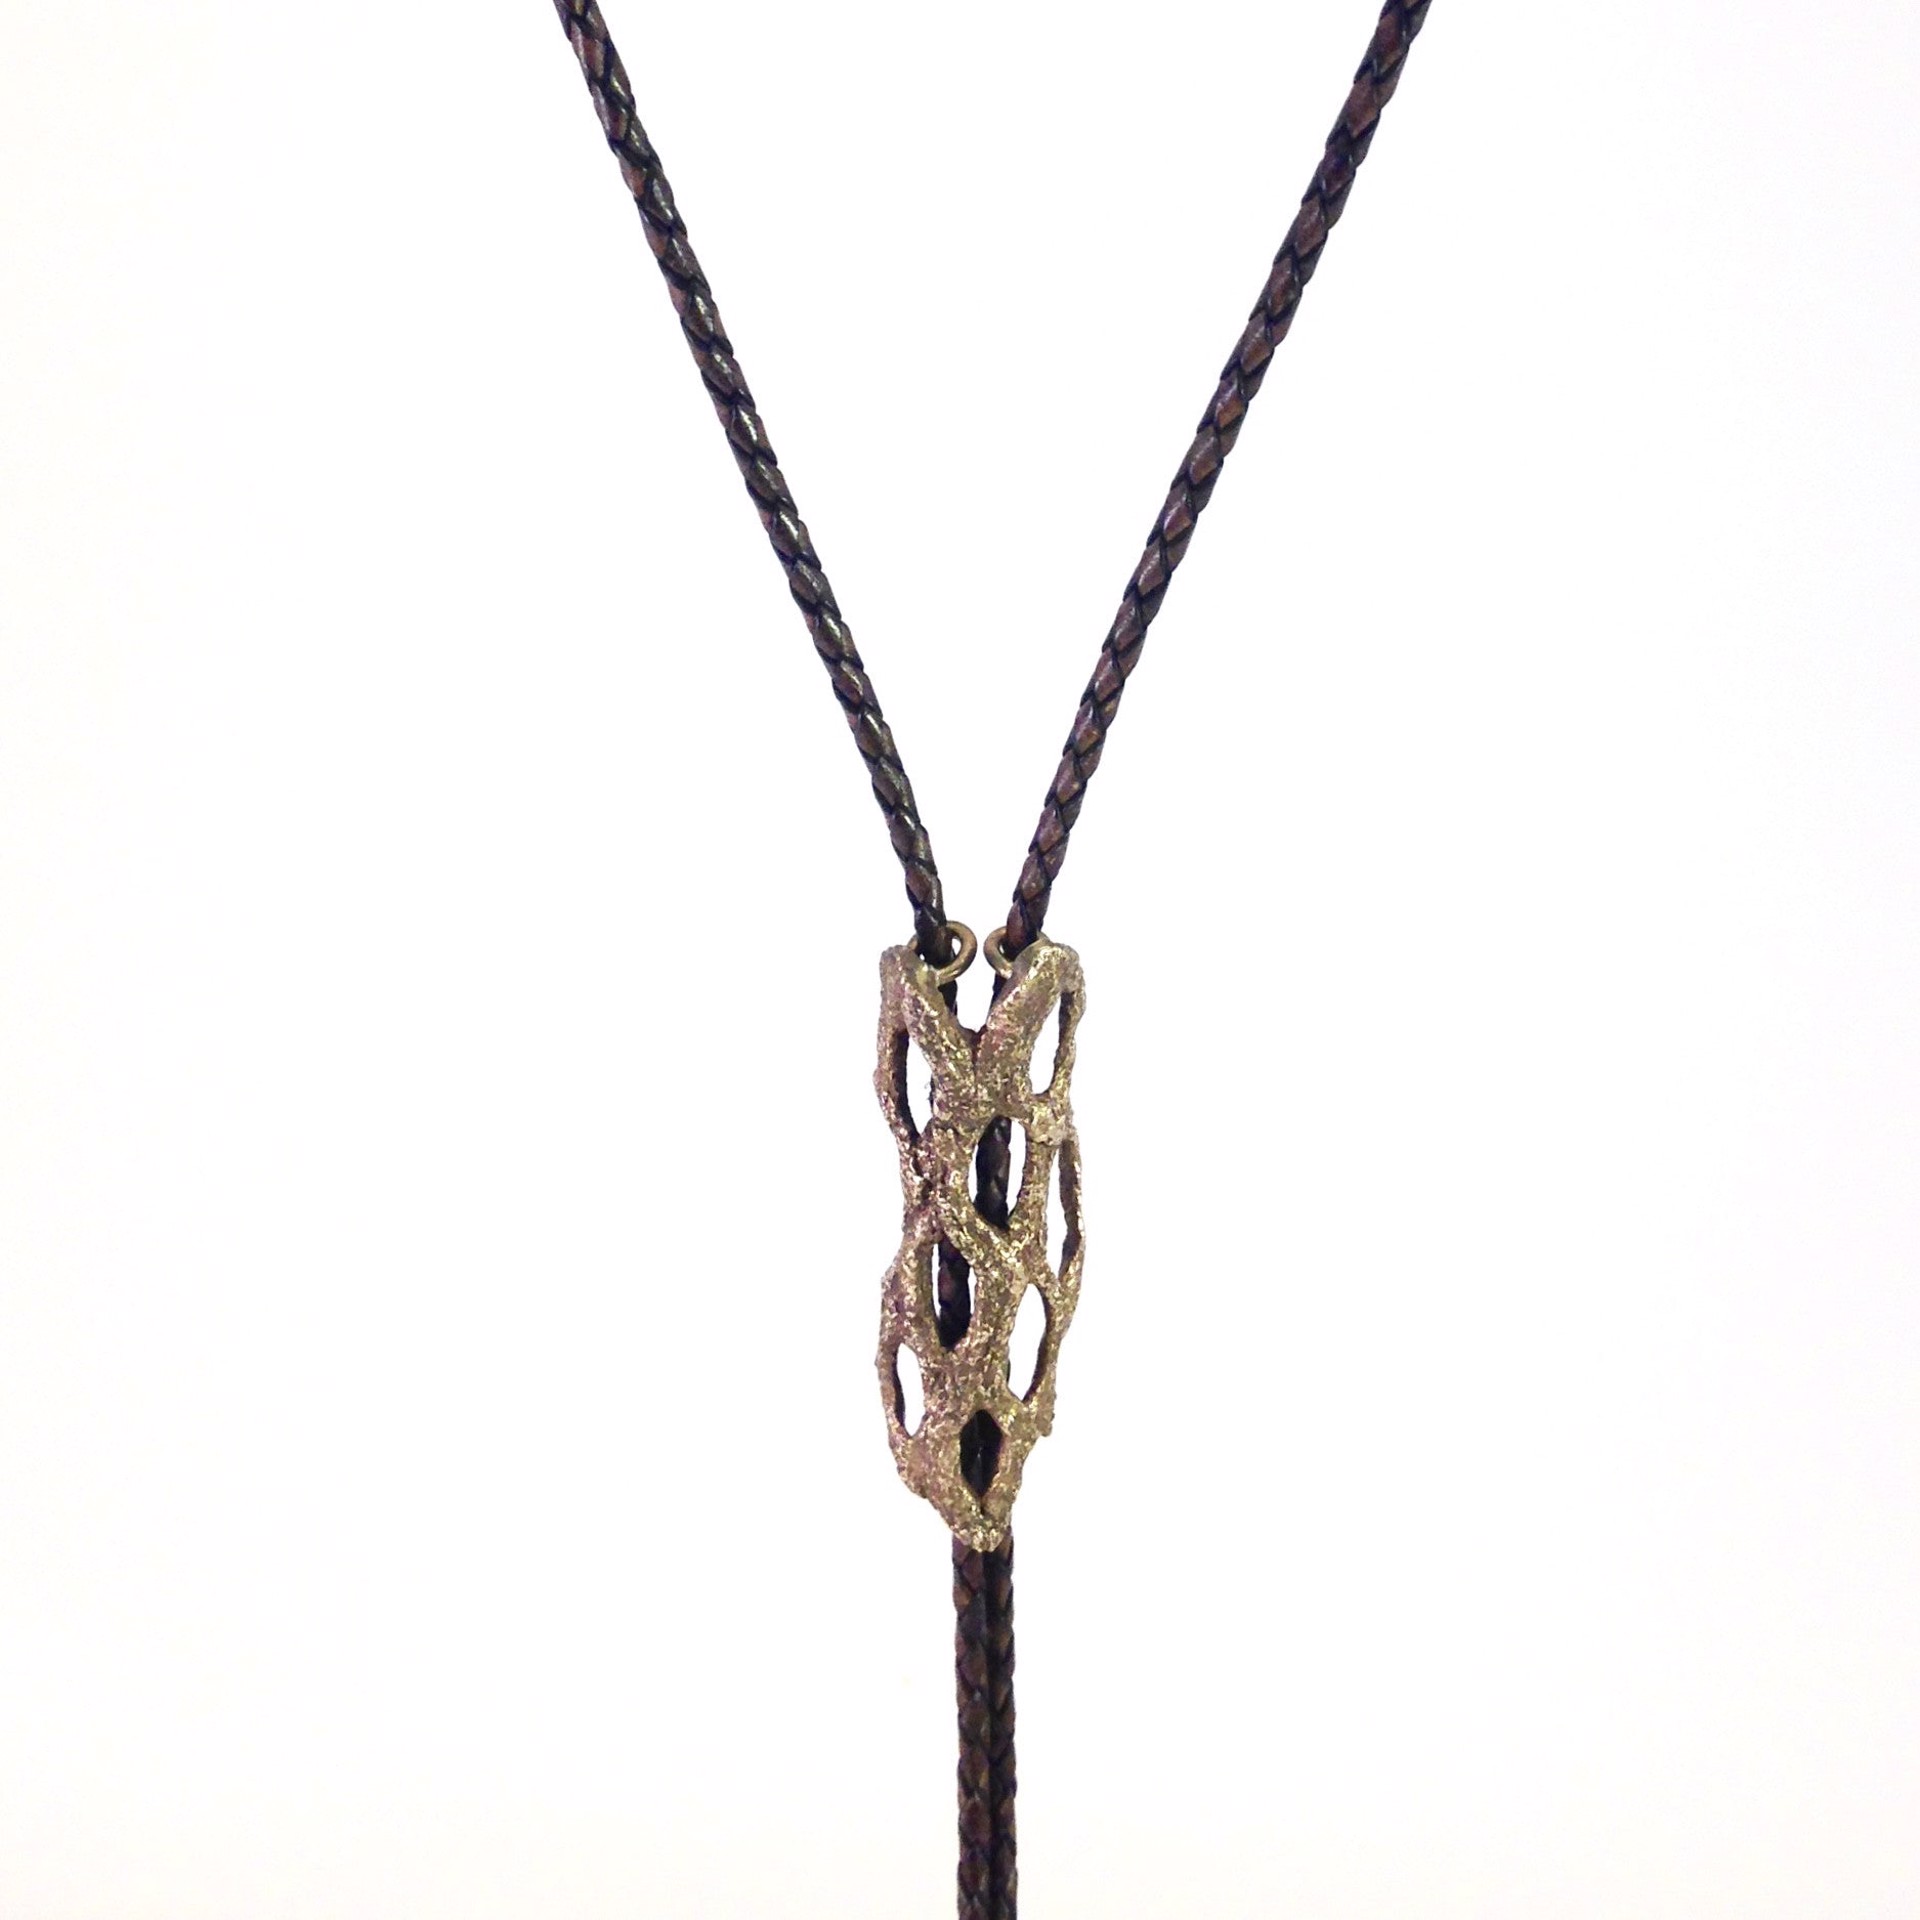 Cholla Cactus Bolo Tie in Bronze by Clementine & Co. Jewelry